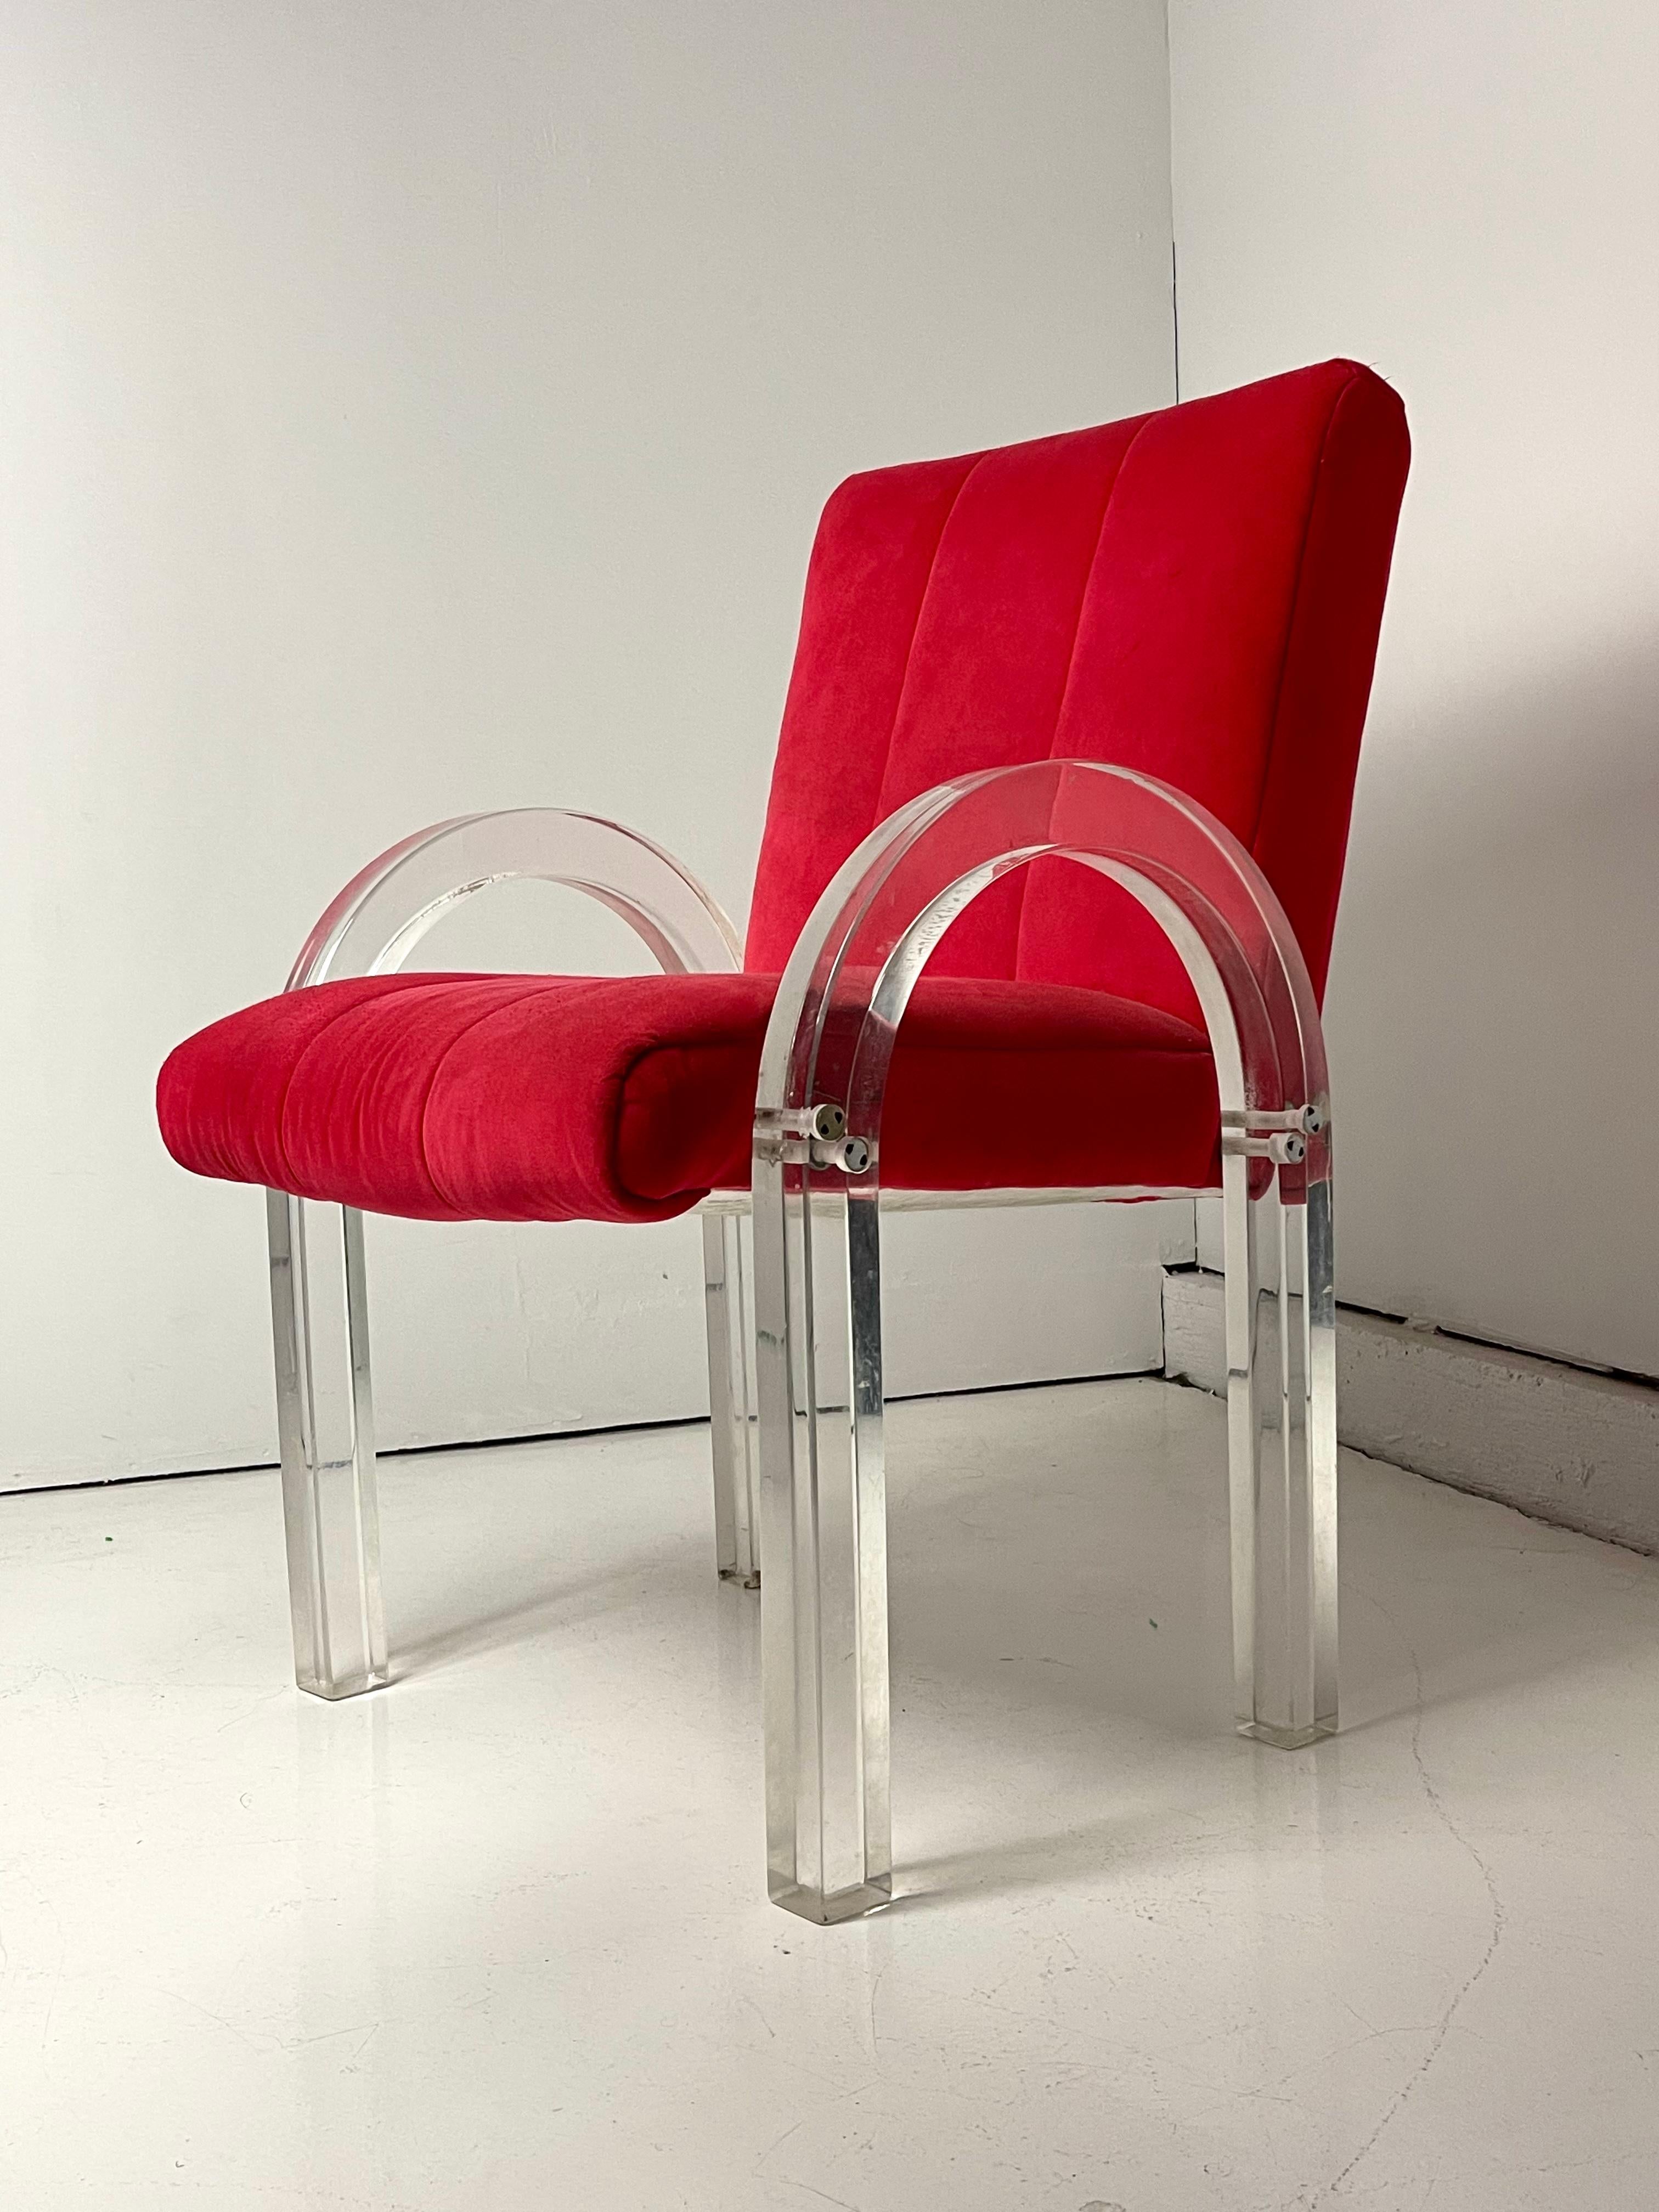 Waterfall chair by lucite maven Charles Hollis Jones. Gorgeous curvature to the elegant and simple lucite frame this chair feels as if it is floating in space. Despite age-appropriate scuffing to lucite and minor pilling and dirt to fabric it